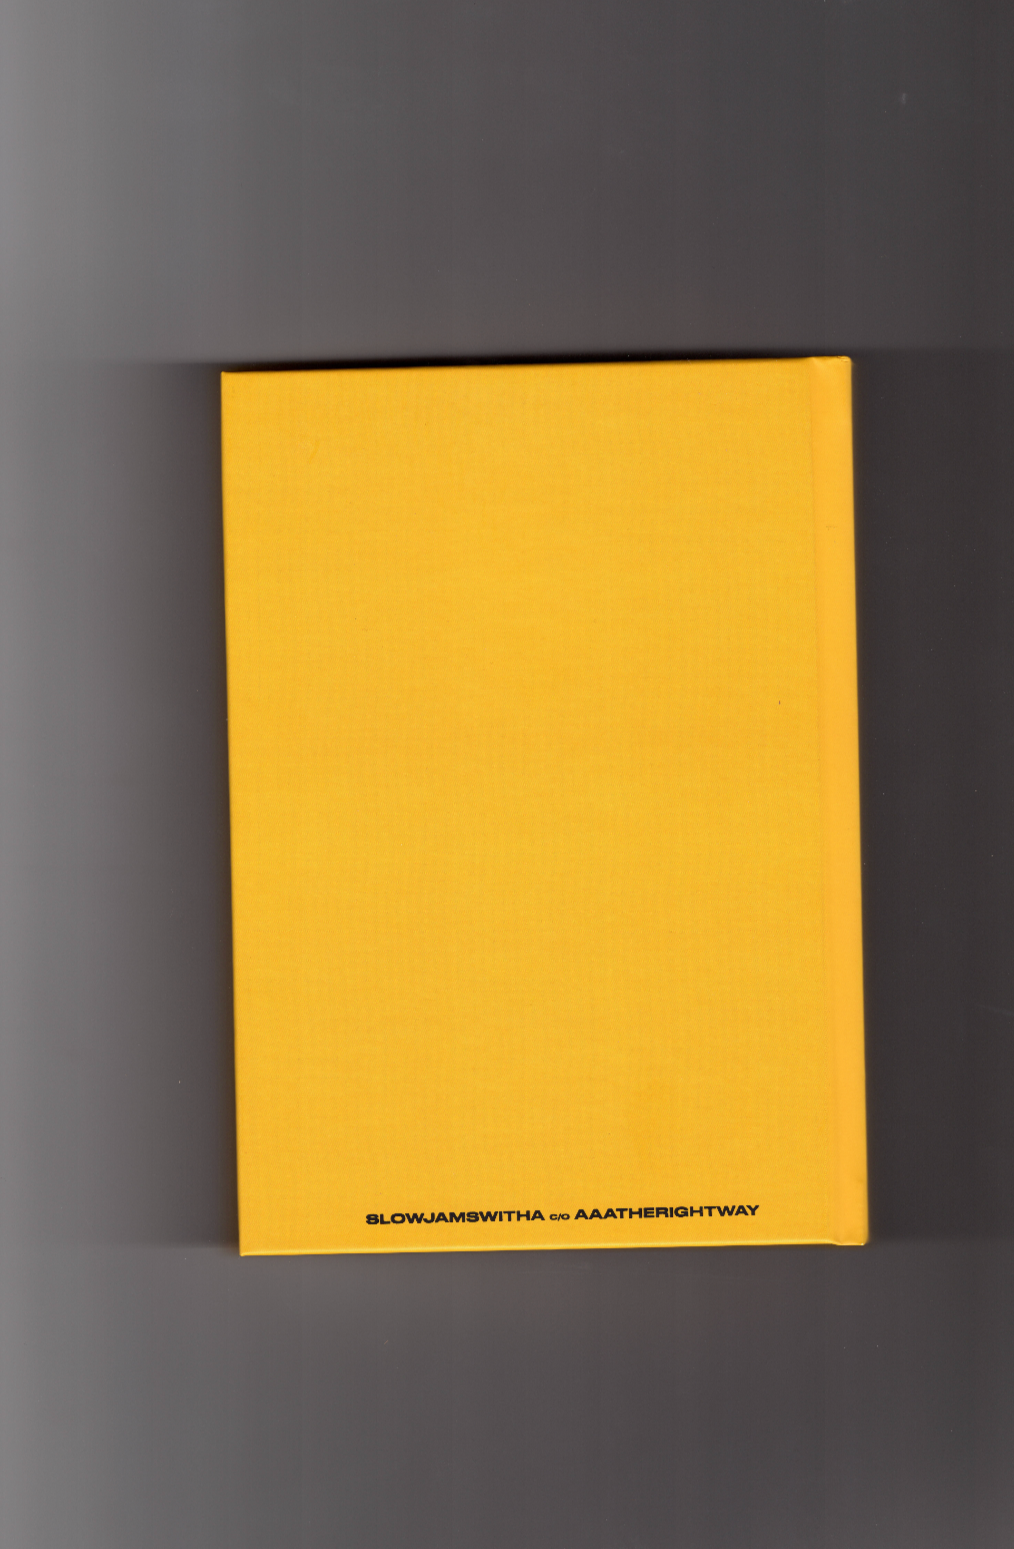 The "Yellow" Book